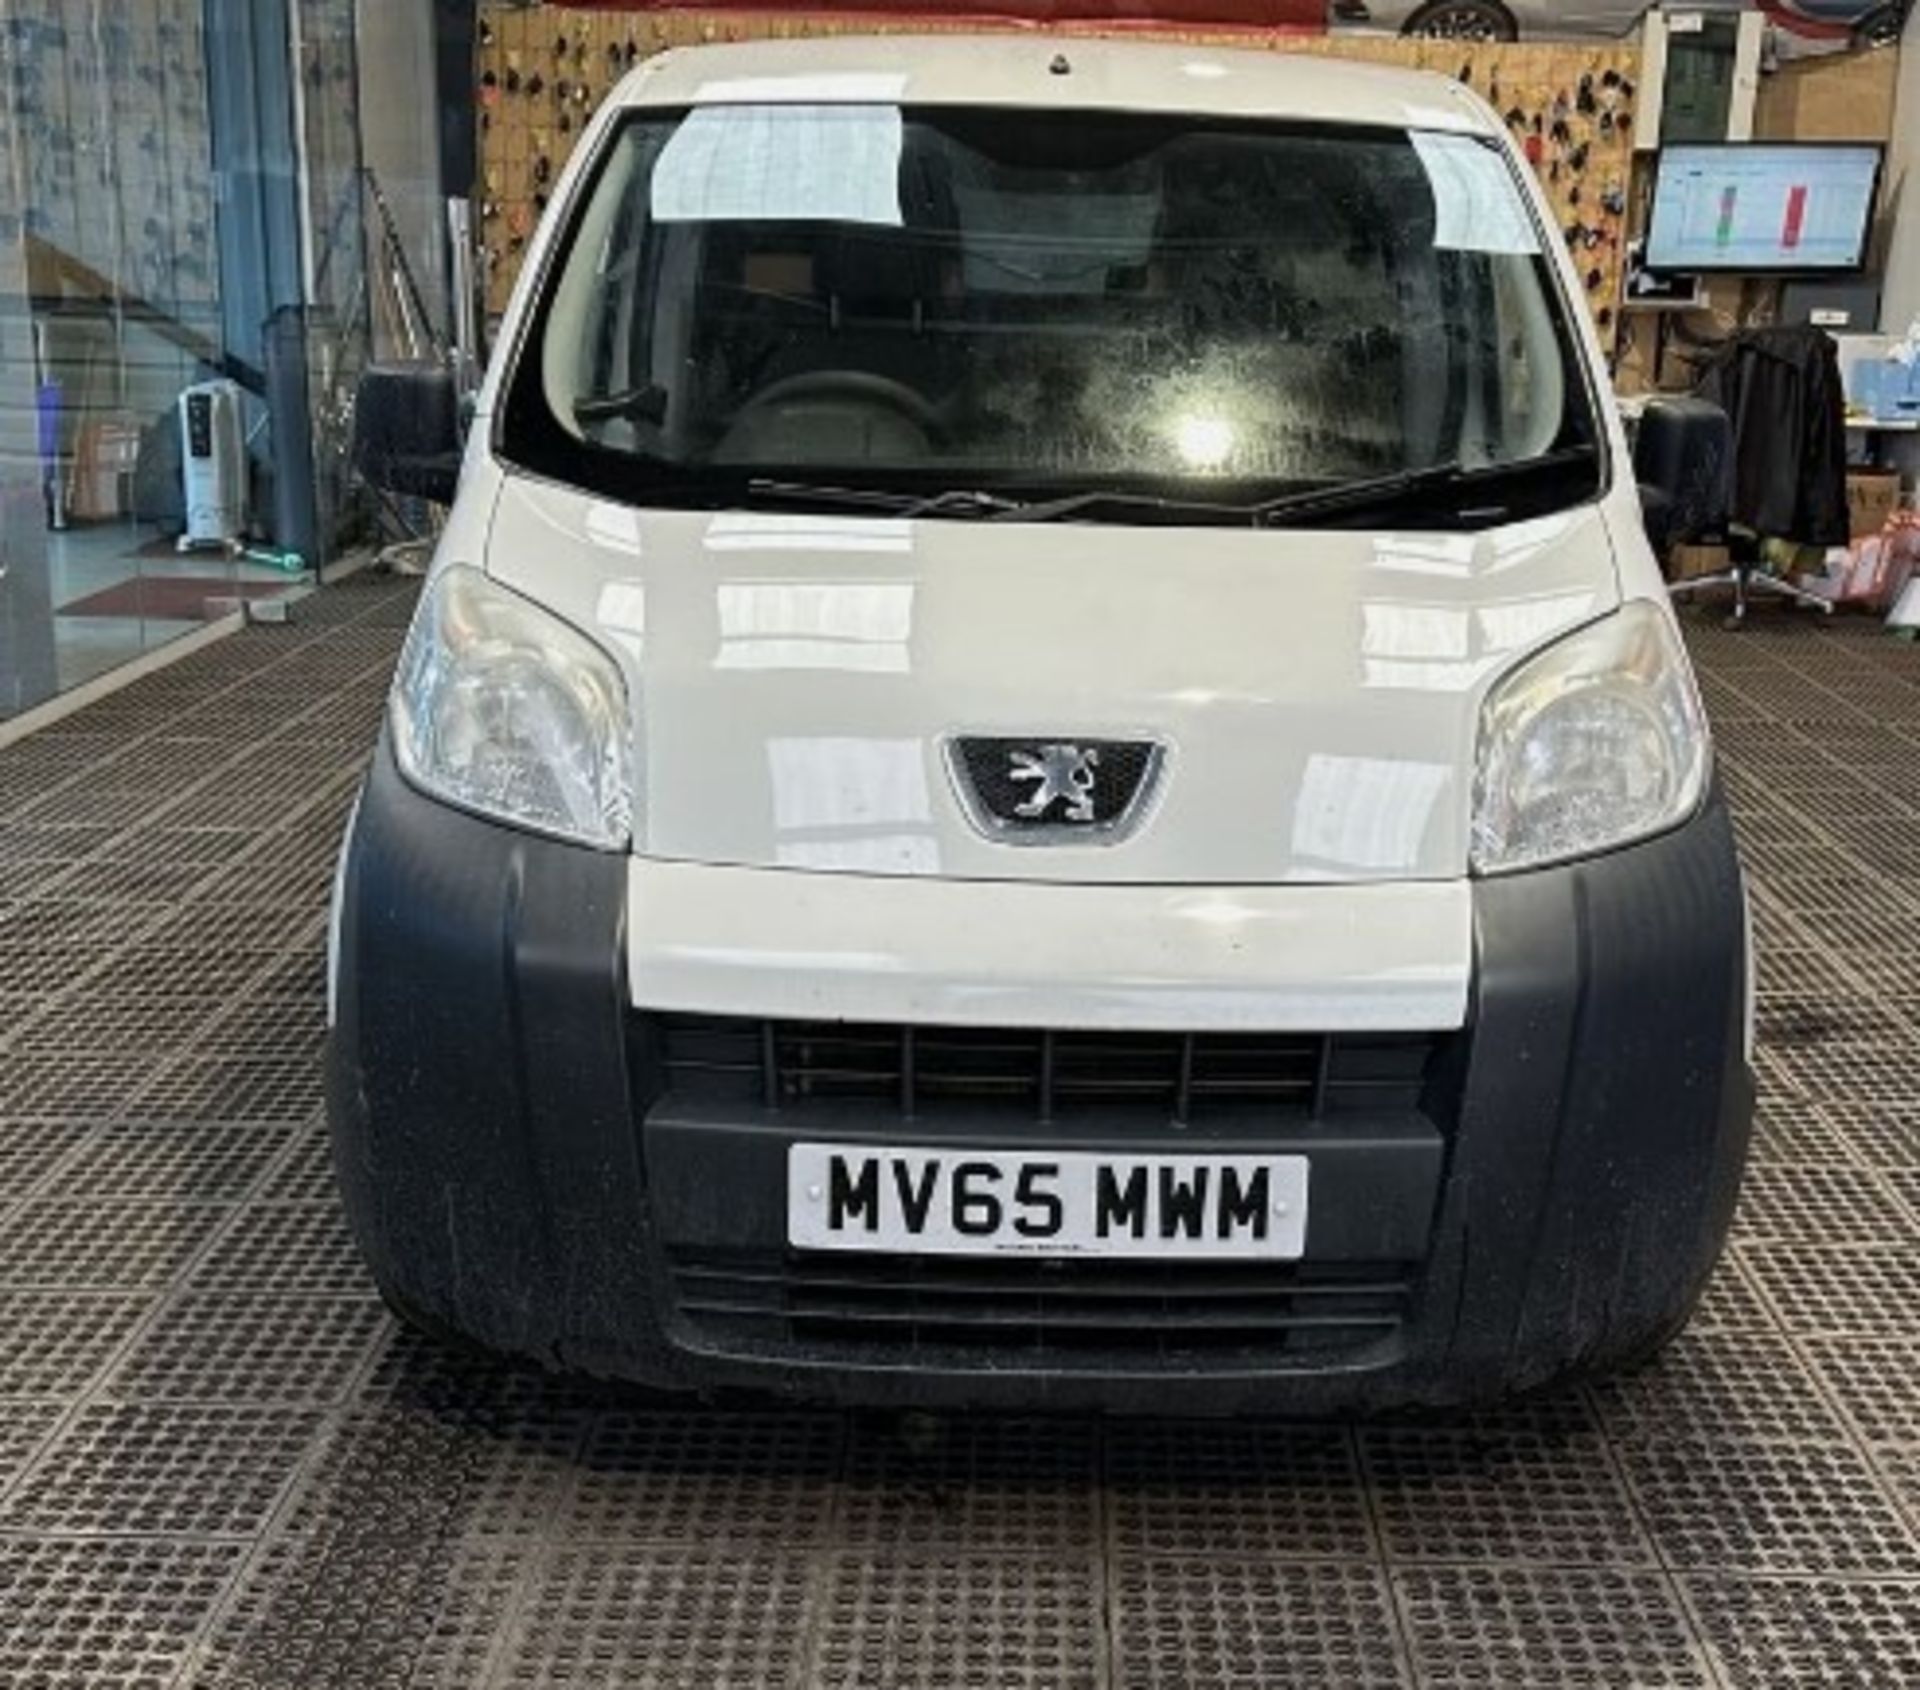 LITTLE WORKHORSE: 65 PLATE PEUGEOT BIPPER DIESEL - READY FOR ACTION >>--NO VAT ON HAMMER--<< - Image 5 of 13